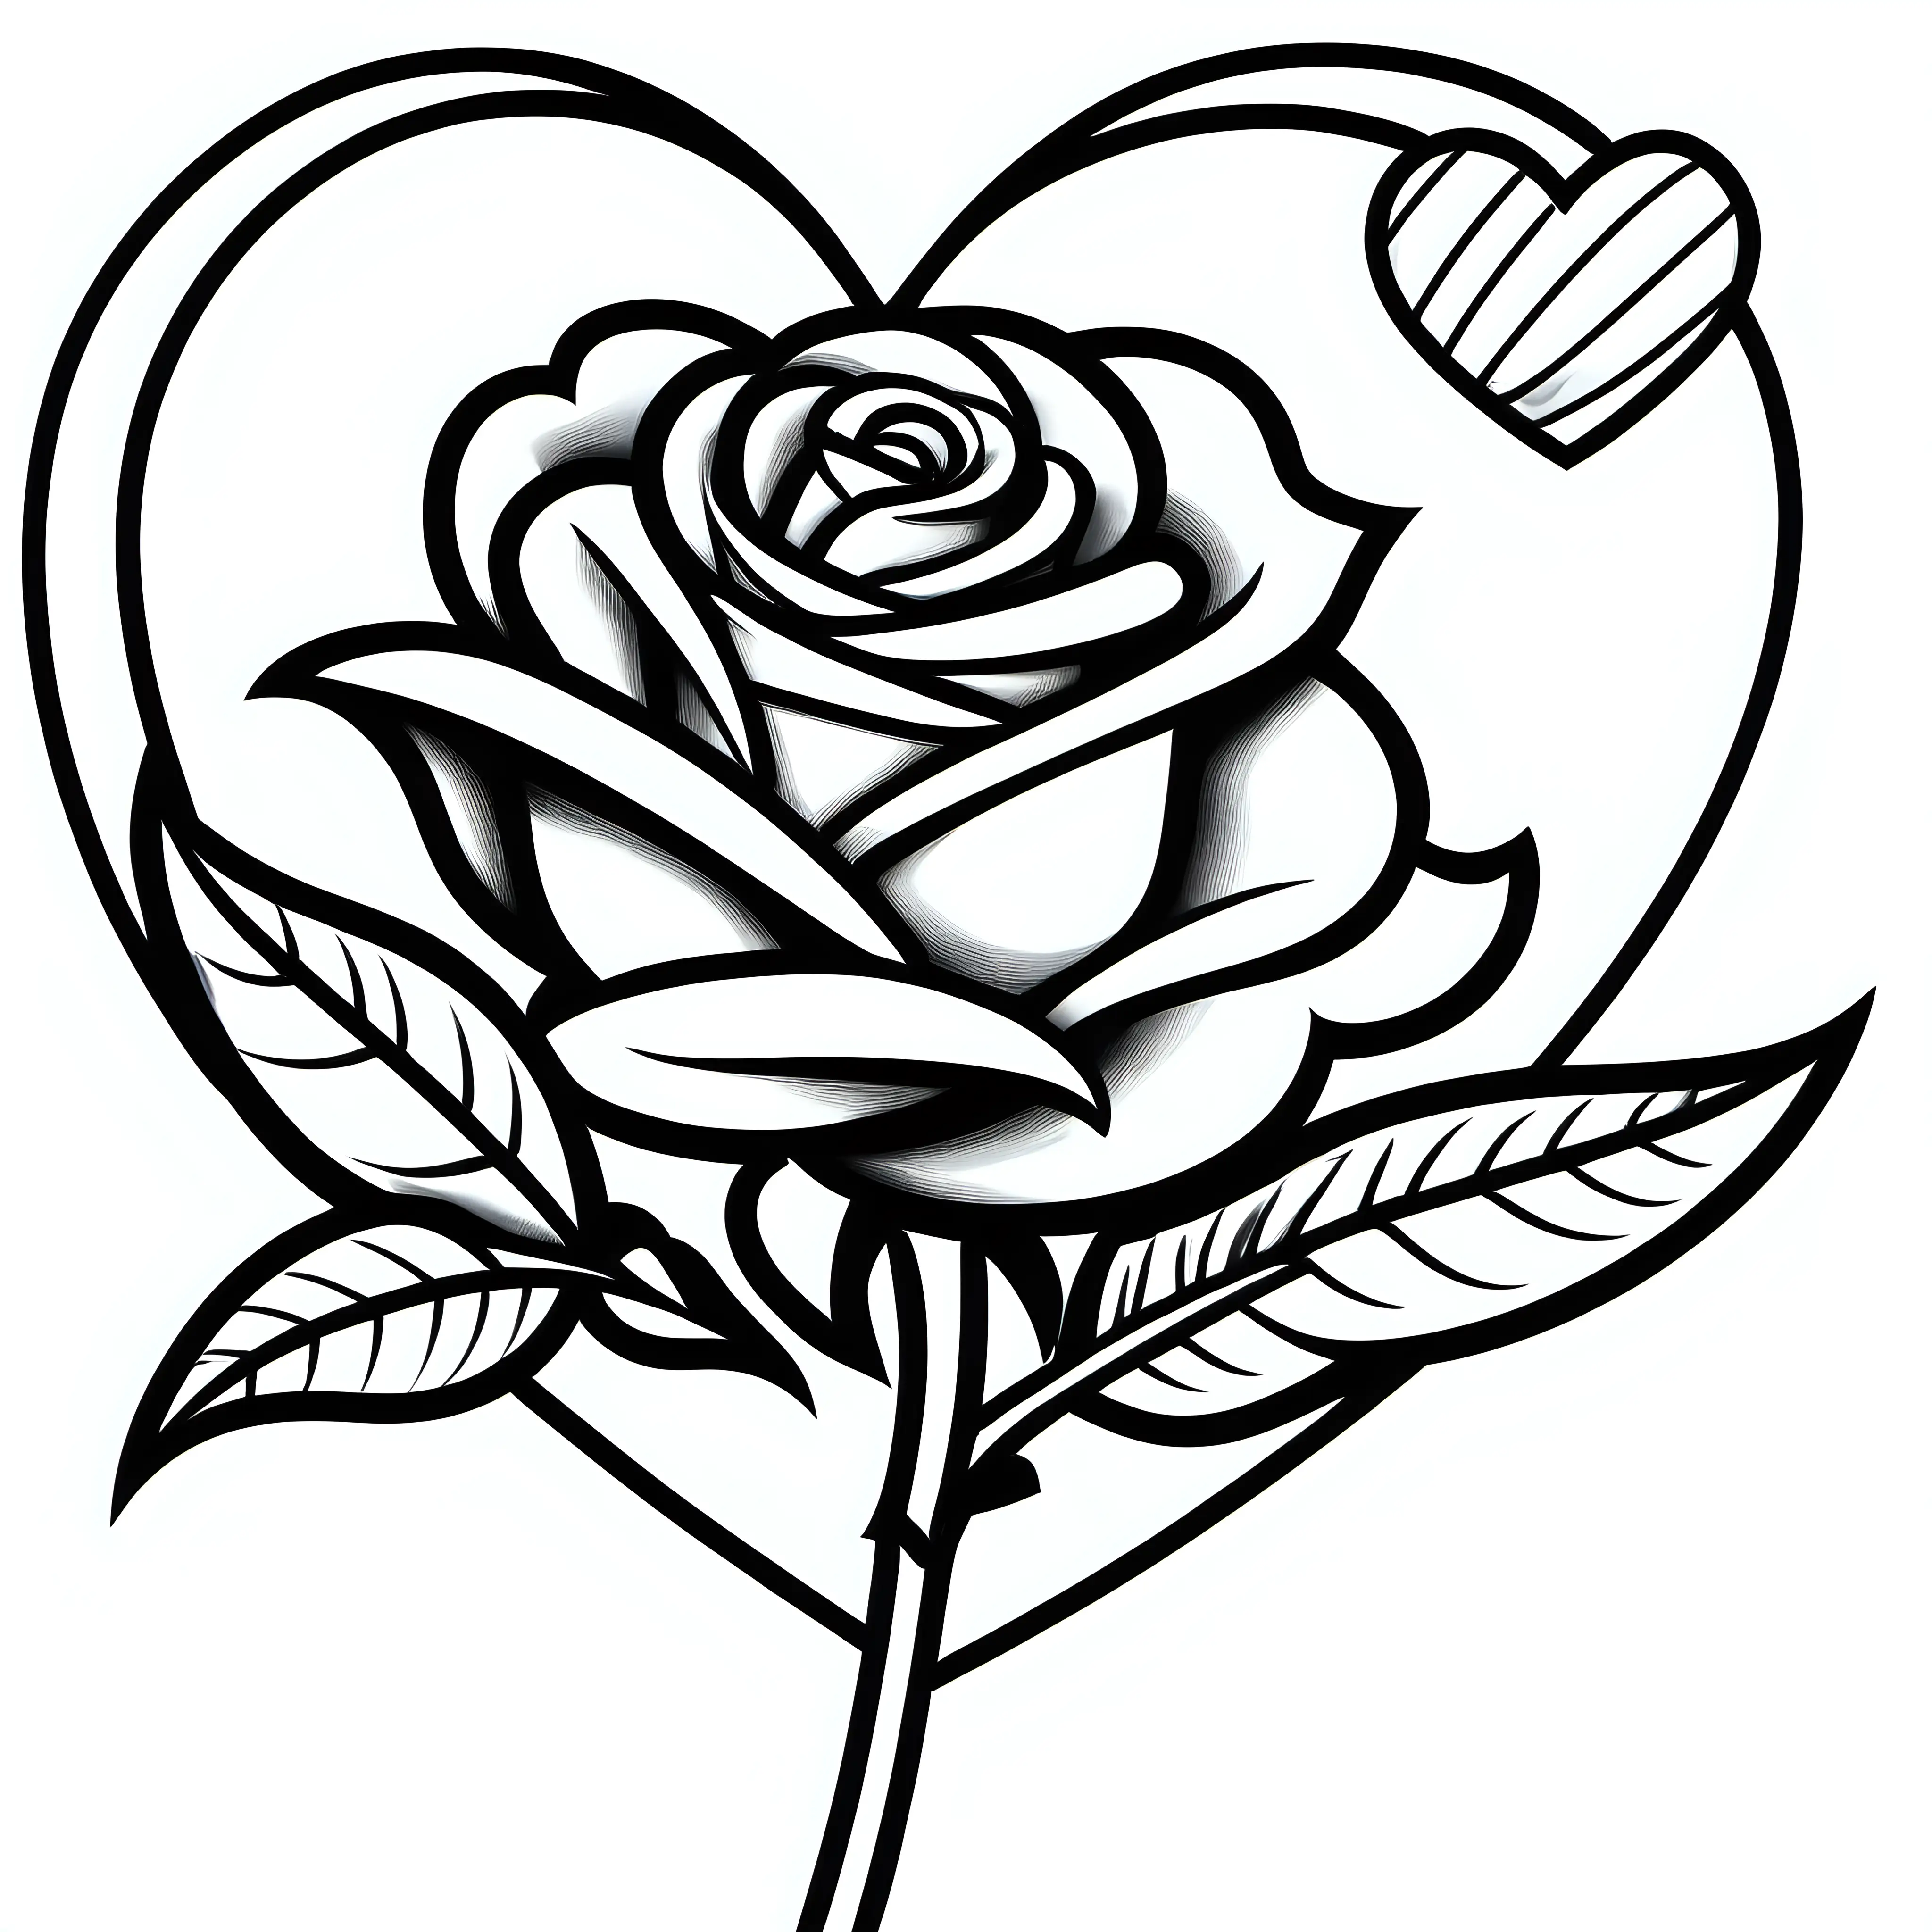 /imagine coloring pages for kids, Valentine's Day 
rose with stem next to a heart, cartoon style, thick lines, low detail, no shading, black and white - - ar 85:110